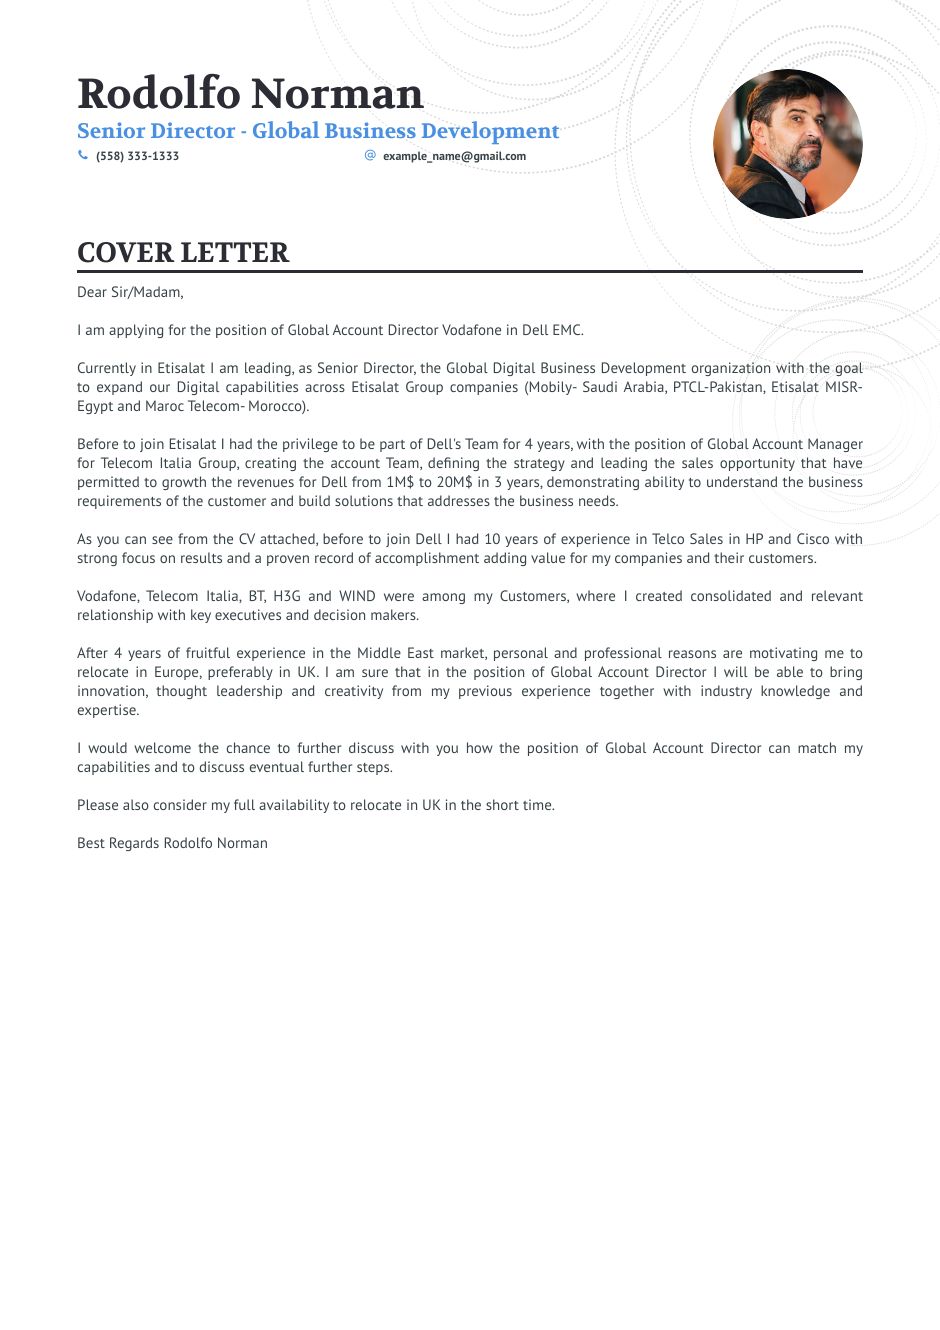 account director coverletter.png